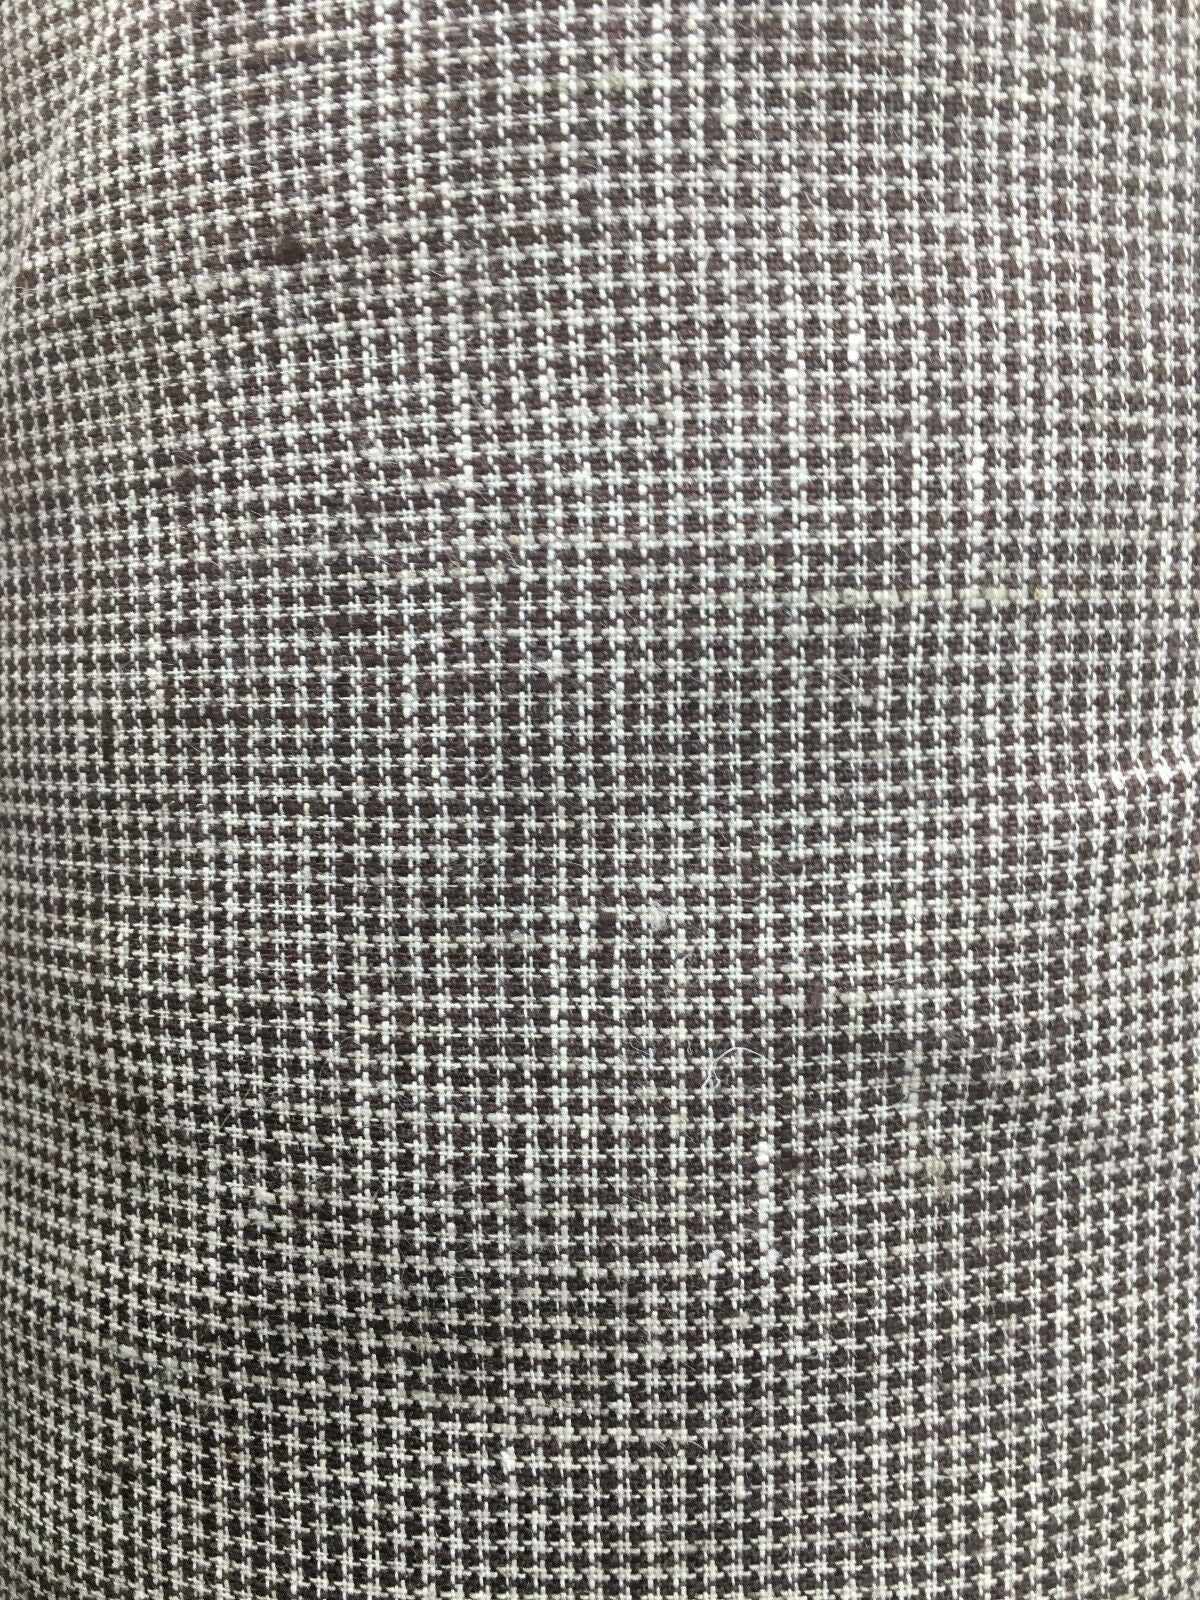 DARK BROWN IVORY Houndstooth 100% Linen Fabric (60 in.) Sold By The Yard